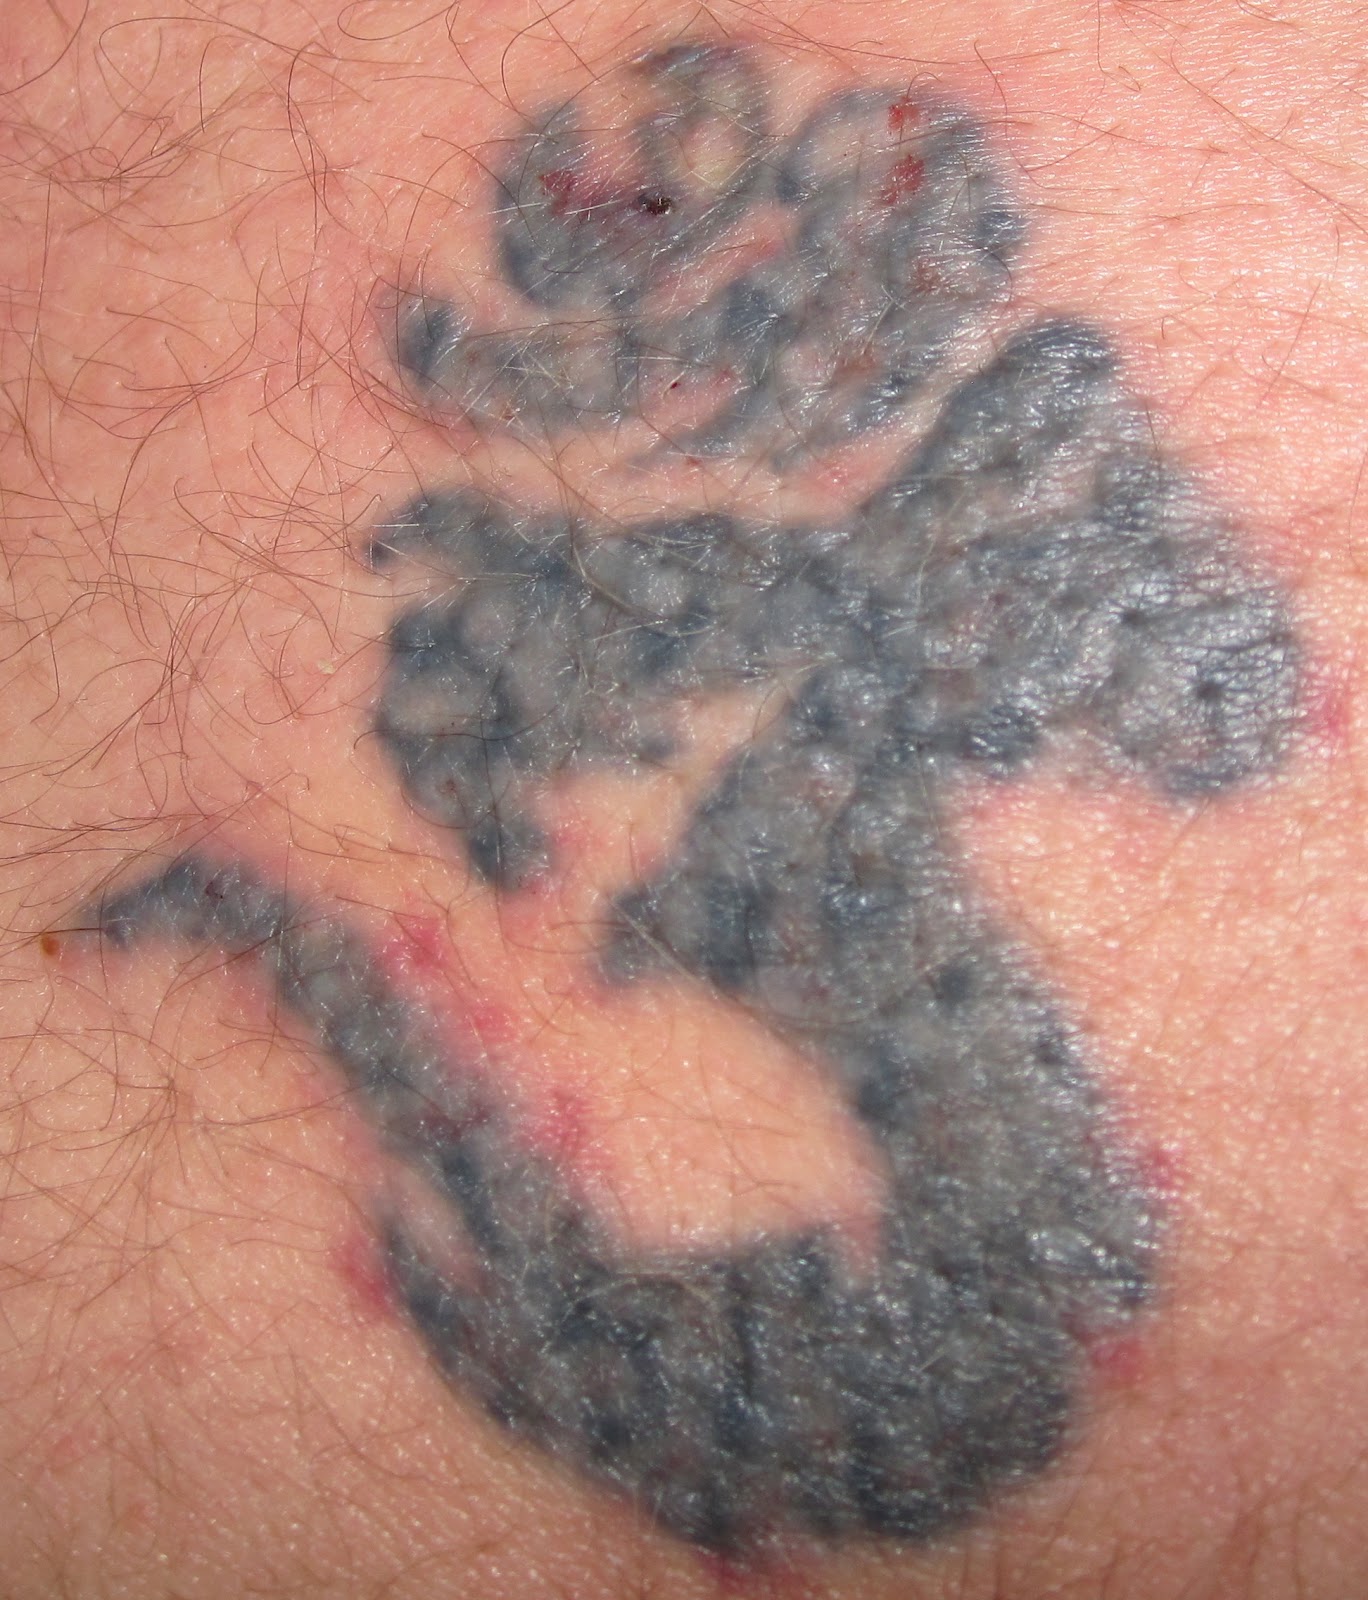 Laser Tattoo Removal: Laser Tattoo Removal Timeline - First Post